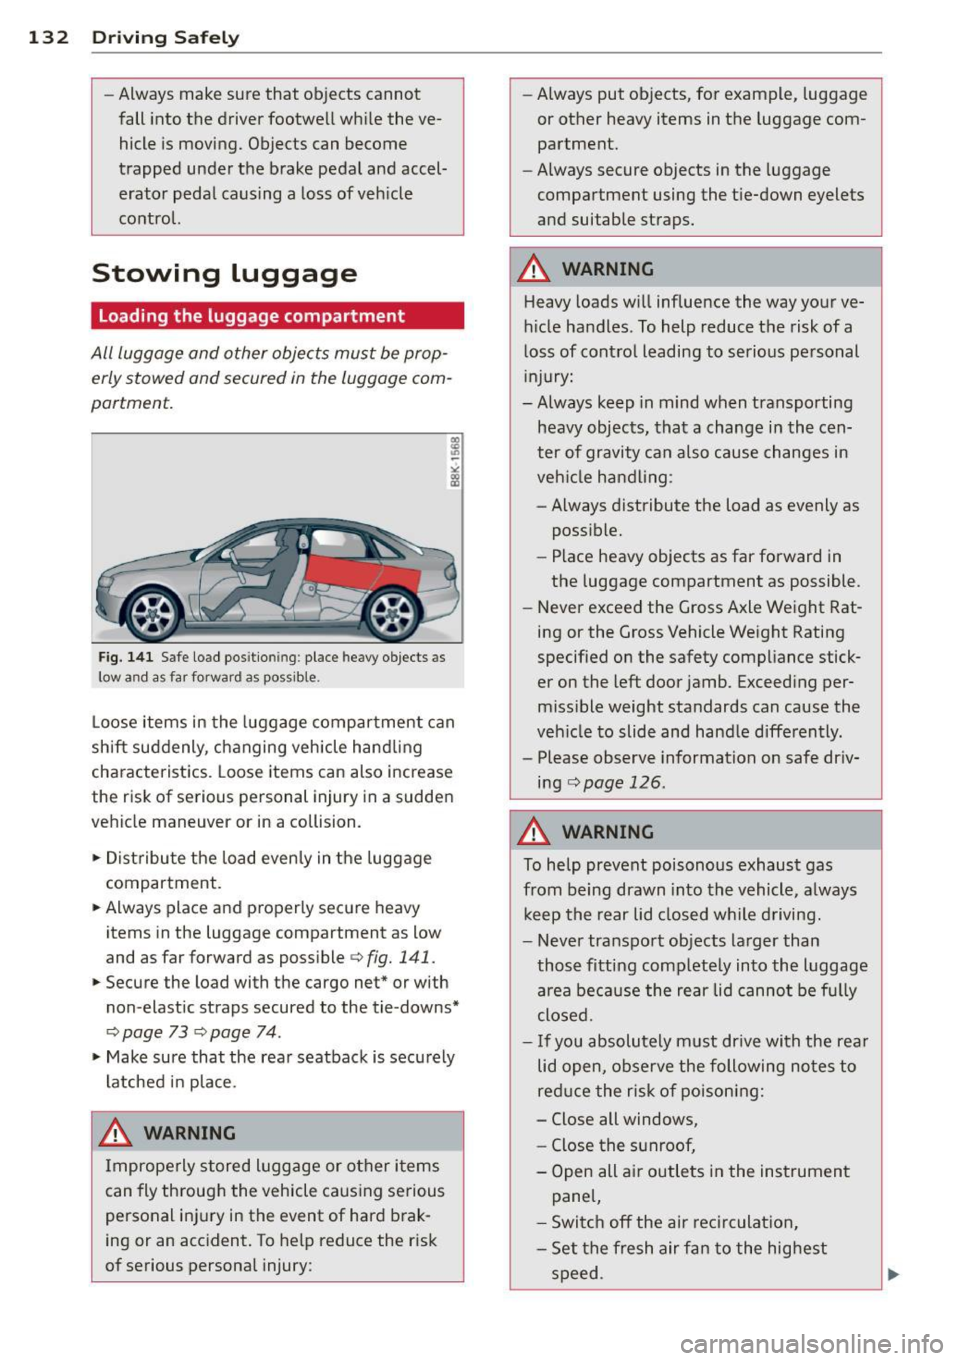 AUDI S4 2015  Owners Manual 132  Driving  Safel y 
-Always  make  sure  that  objects  cannot 
fall  into  the  driver  footwe ll wh ile  the  ve­
hicle  is  moving.  Objects  can  become 
trapped  under  the  brake  pedal  and